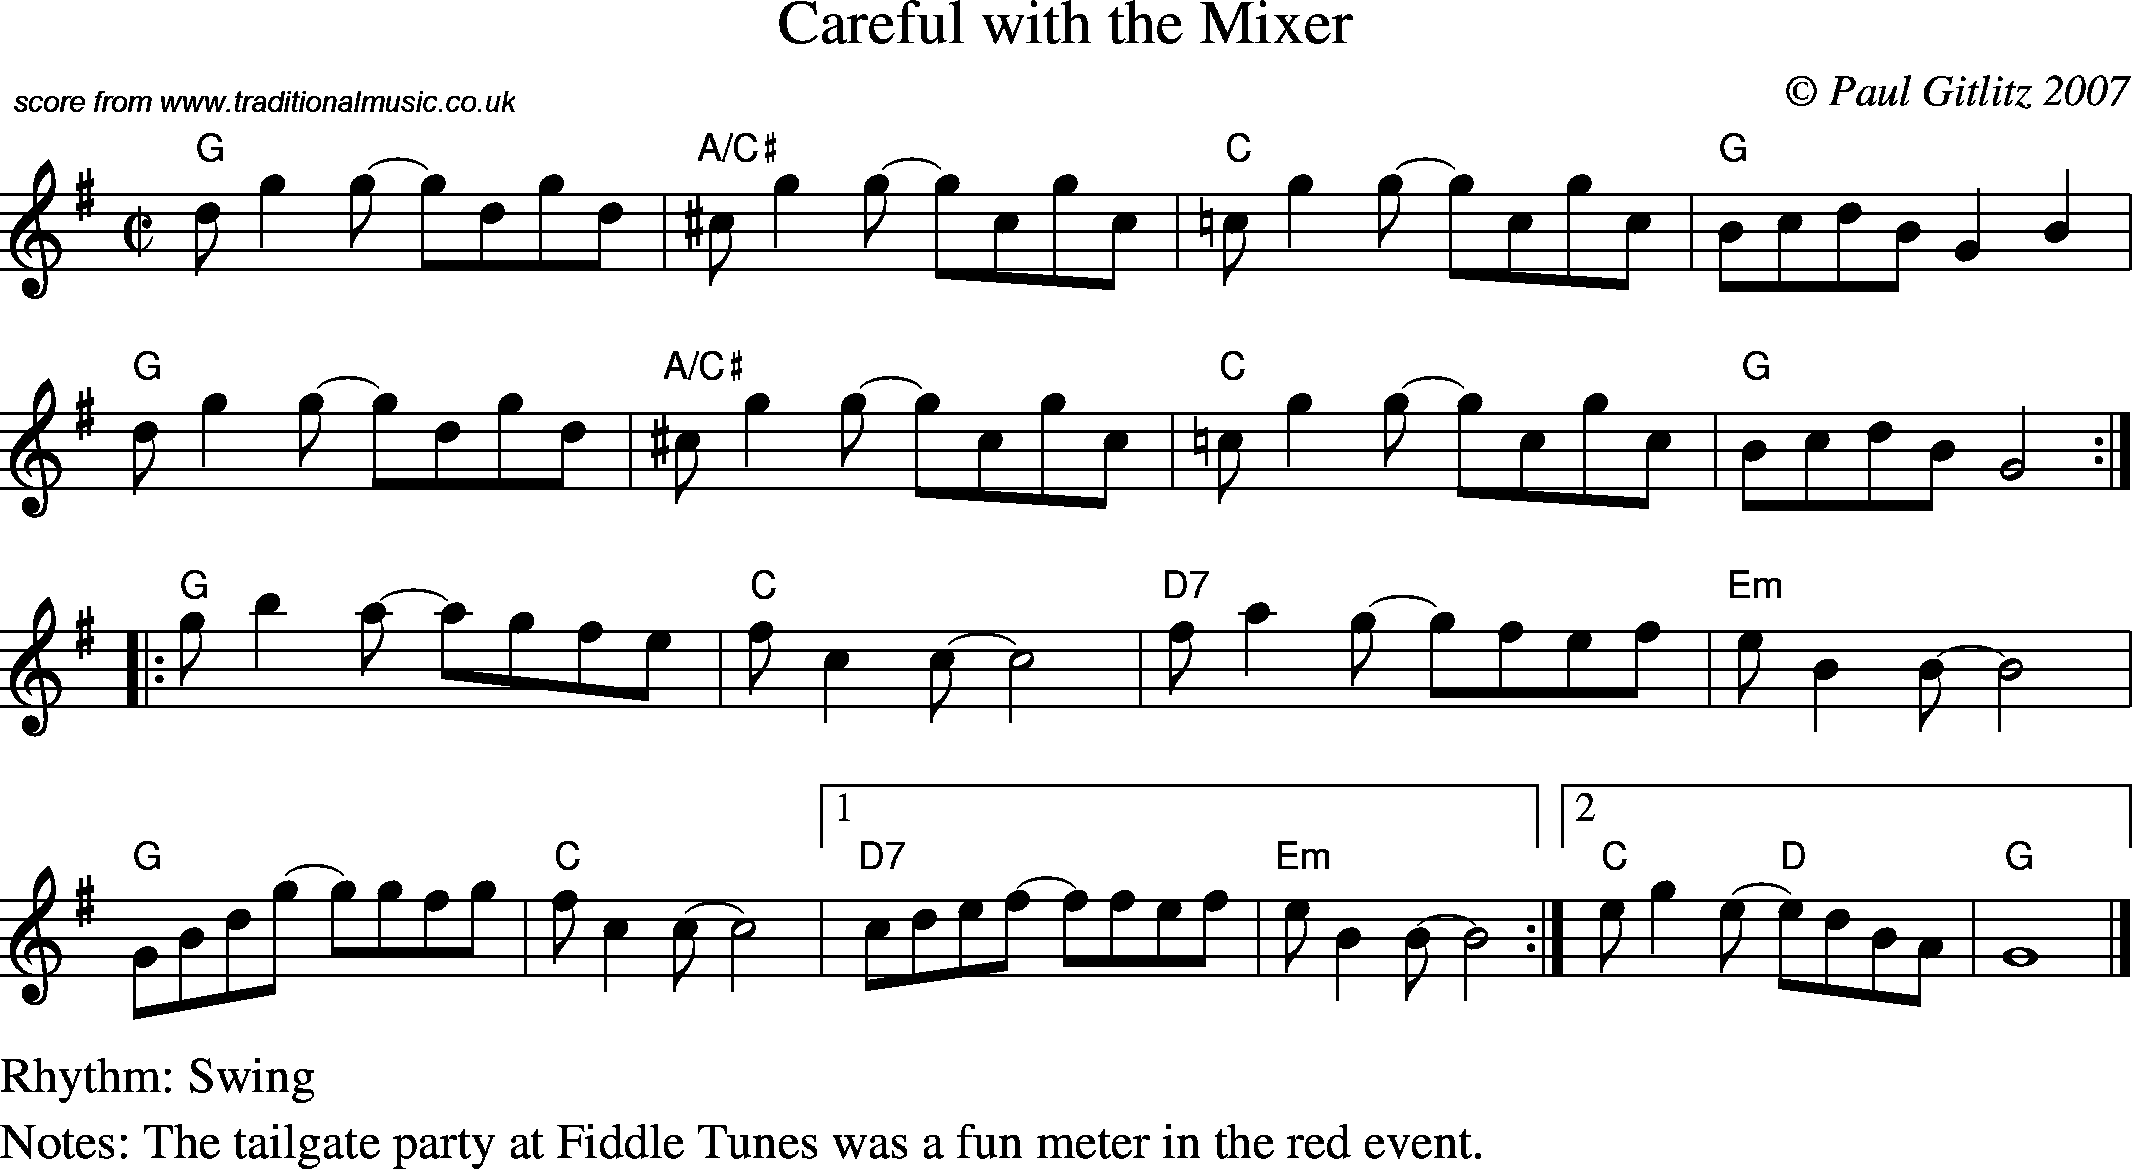 Sheet Music Score for Swing - Careful with the Mixer